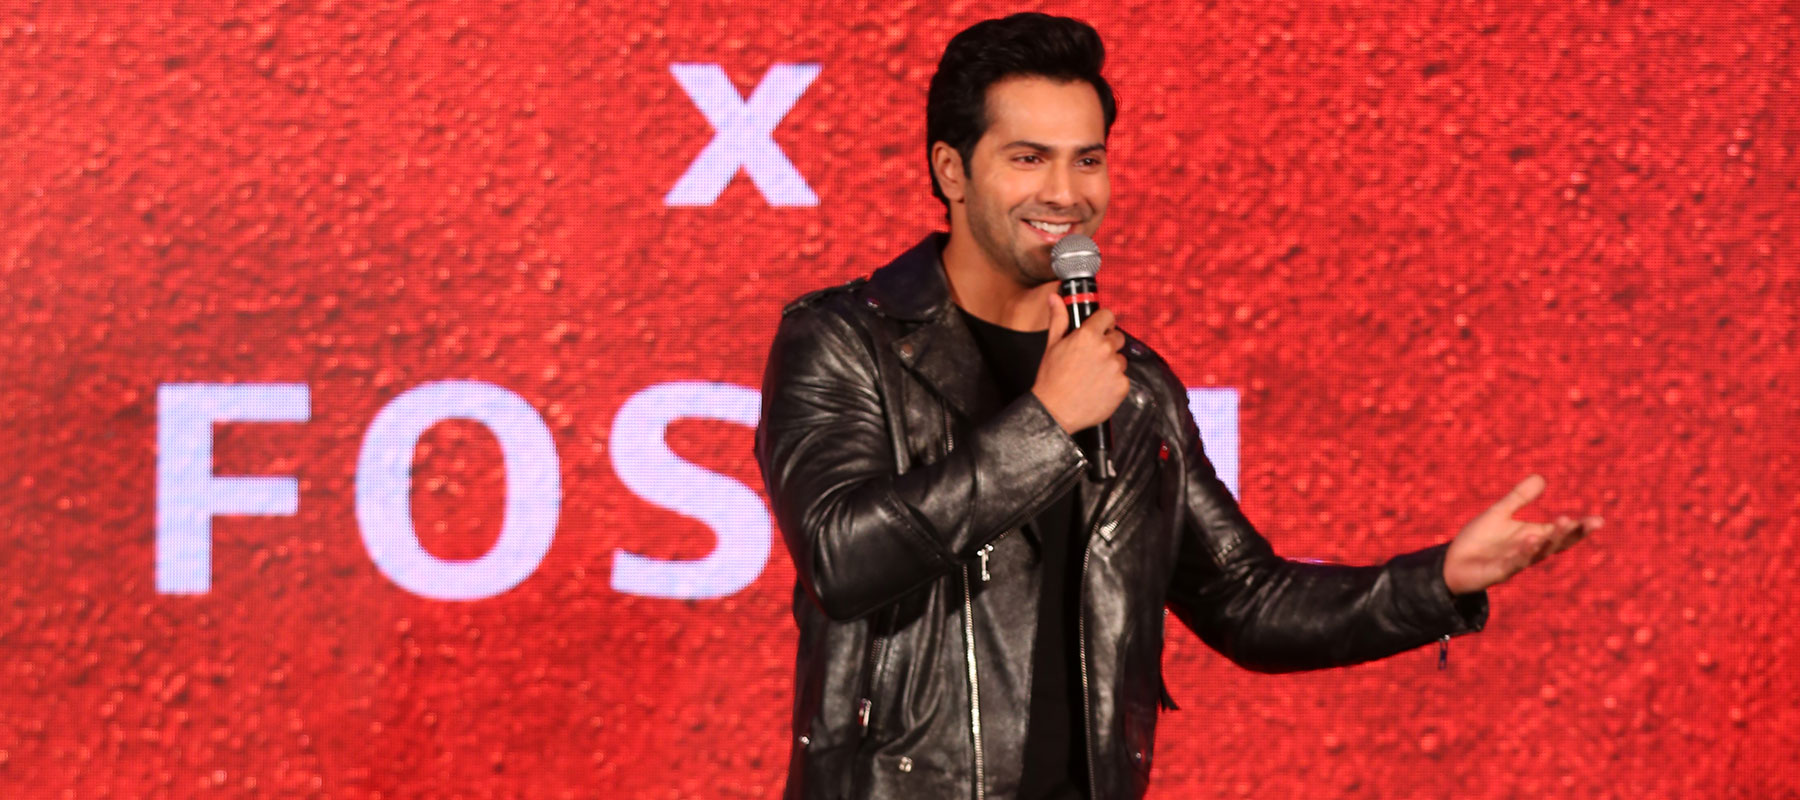 Varun Dhawan S Xxx Video - Curated With A Purpose: Varun Dhawan x Fossil | Fossil Group